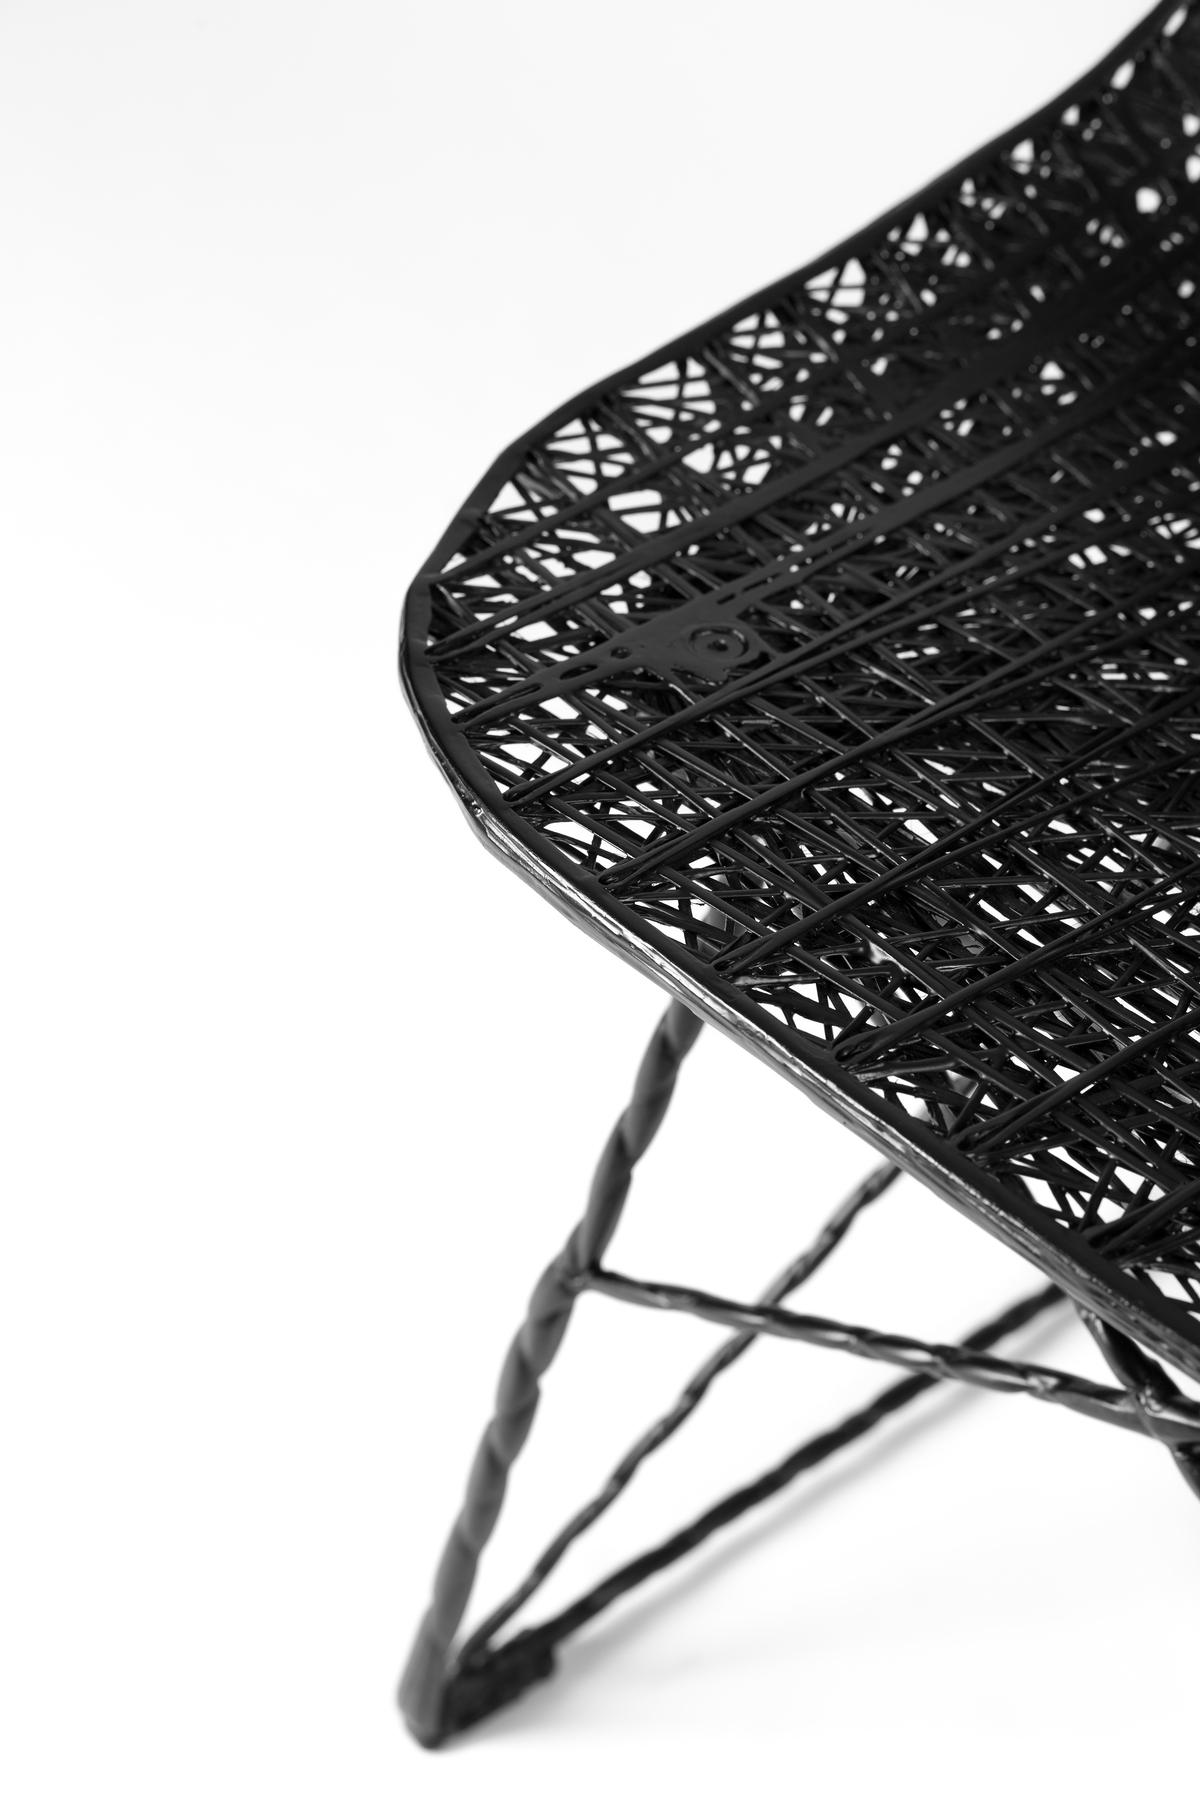 Moooi Carbon Chair in Black Fiber with Epoxy Resin by Bertjan Pot For Sale 3